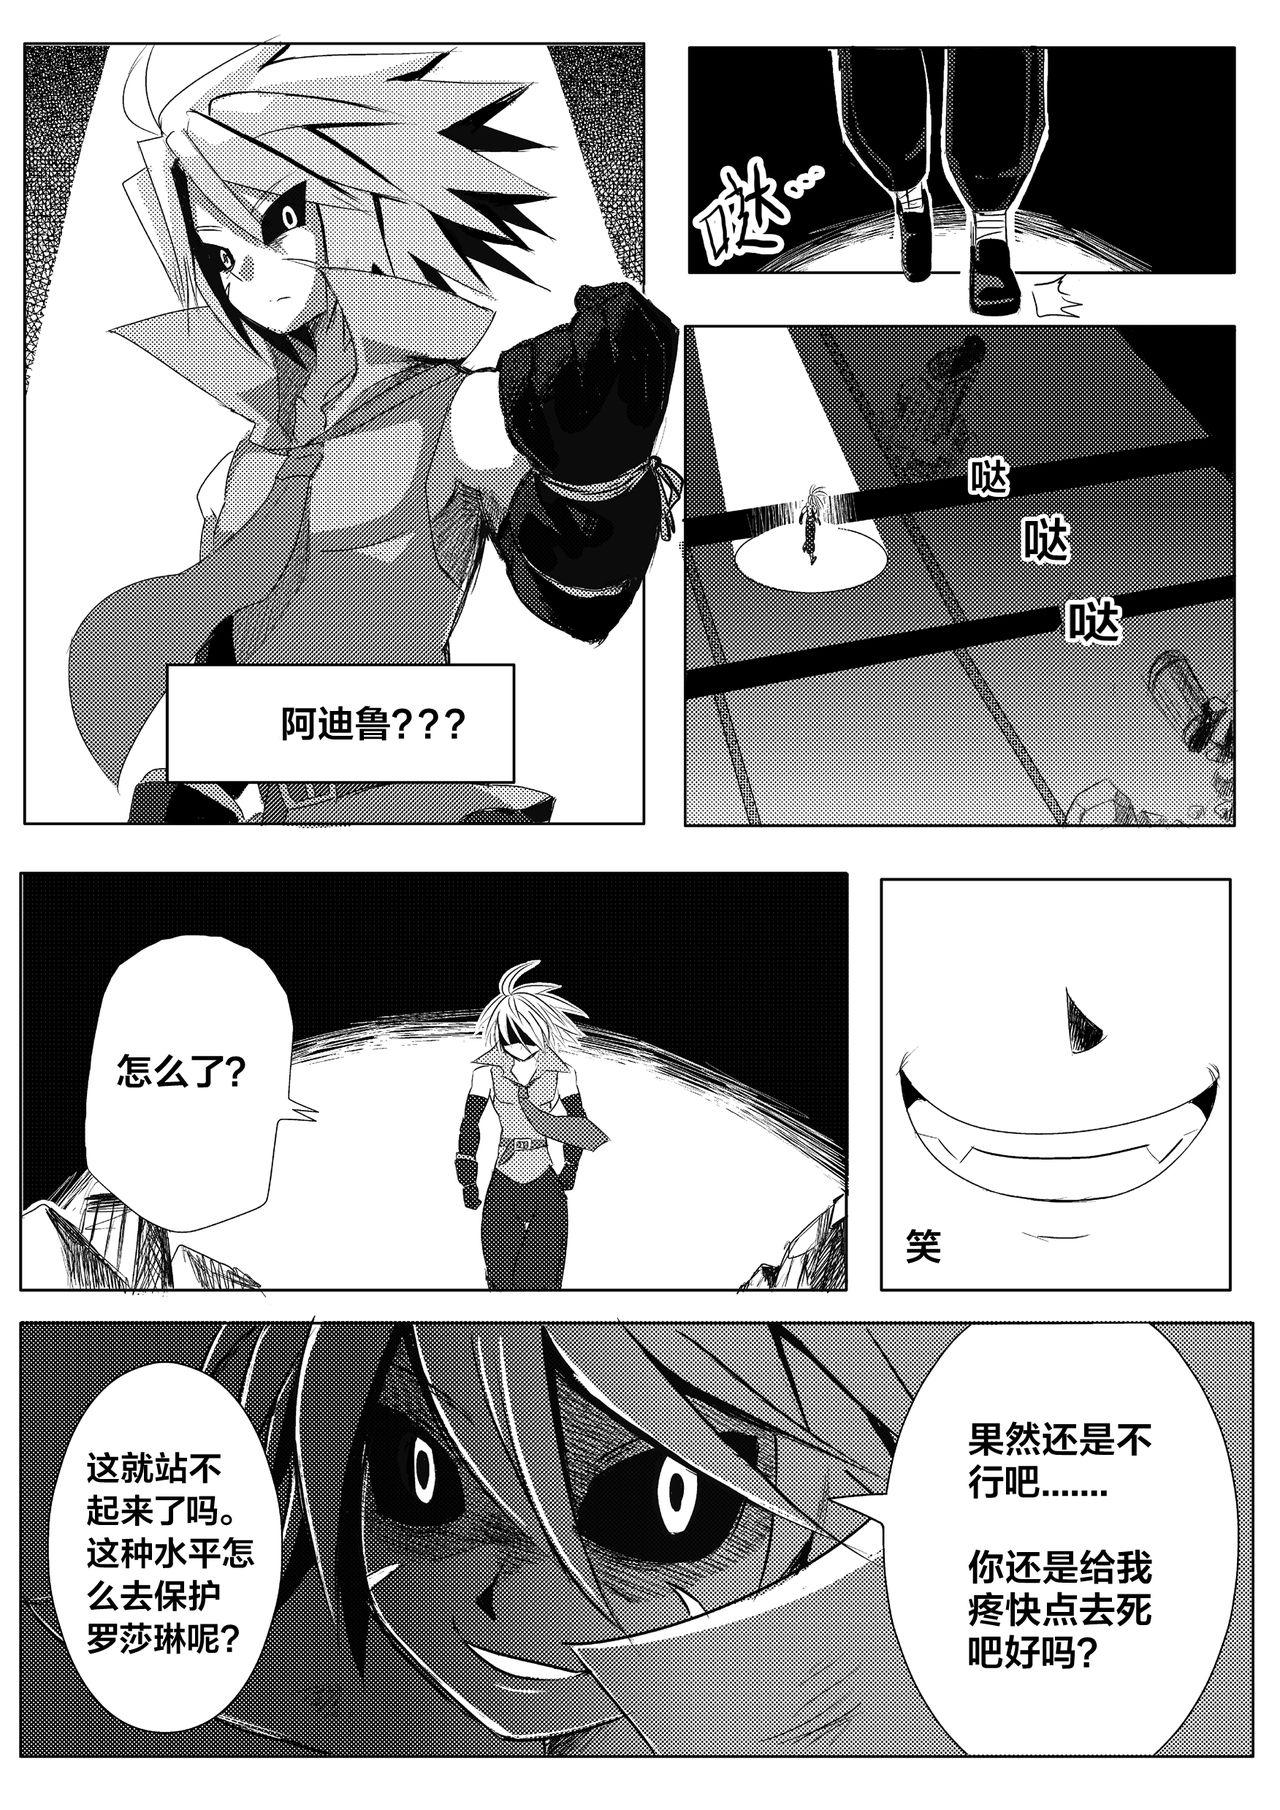 Workout 魔界戰記2 - Disgaea Brazzers - Page 5